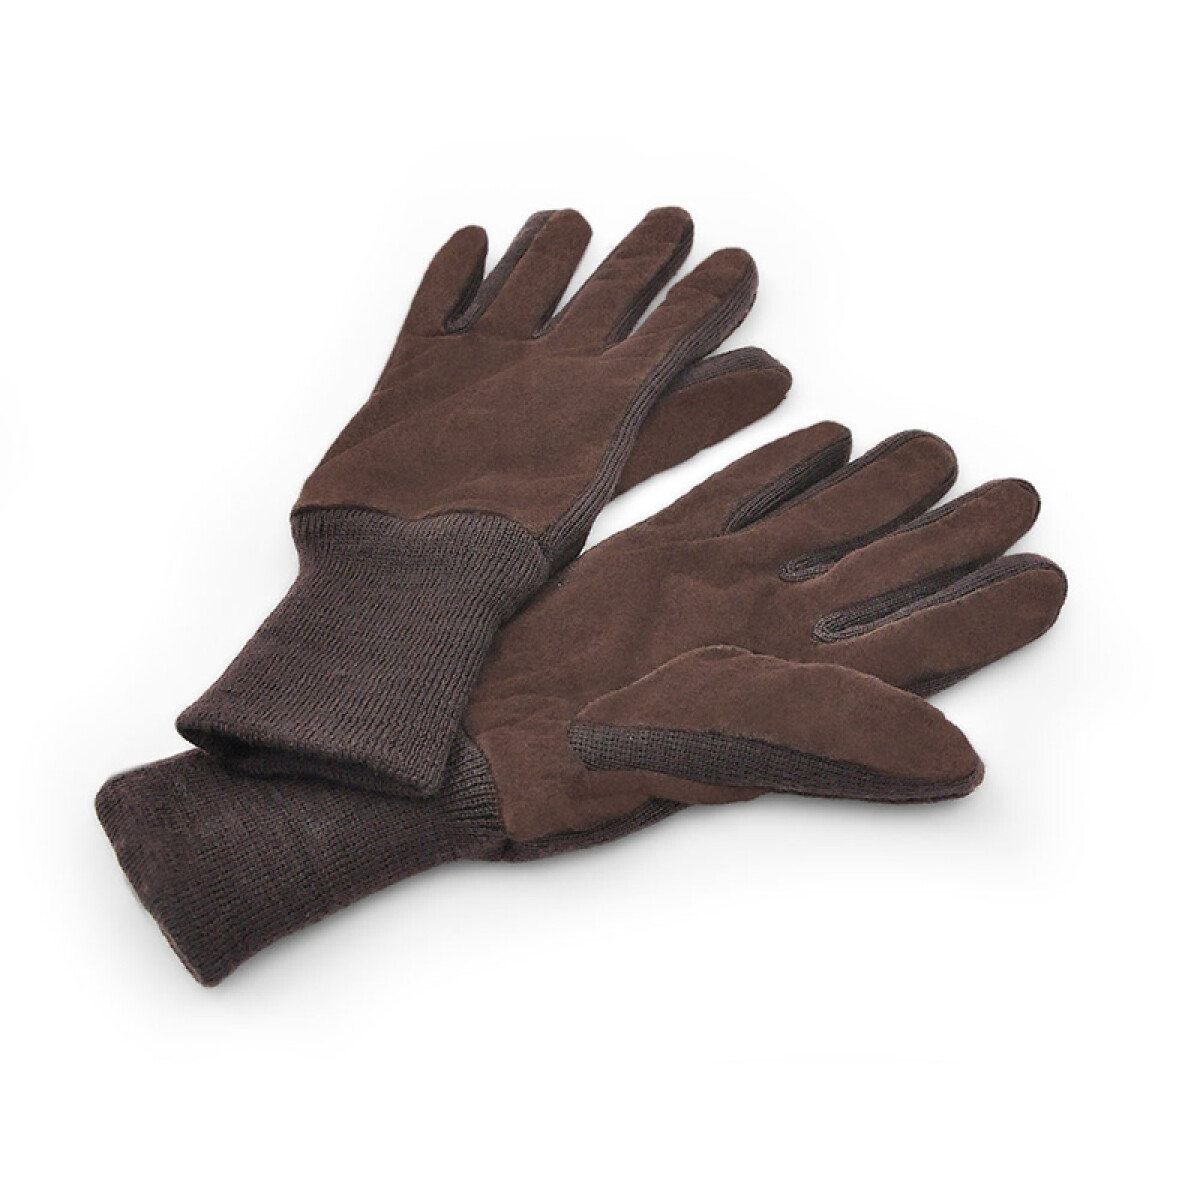 GUANTES ALTANO - CHOCOLATE TALLE XS 